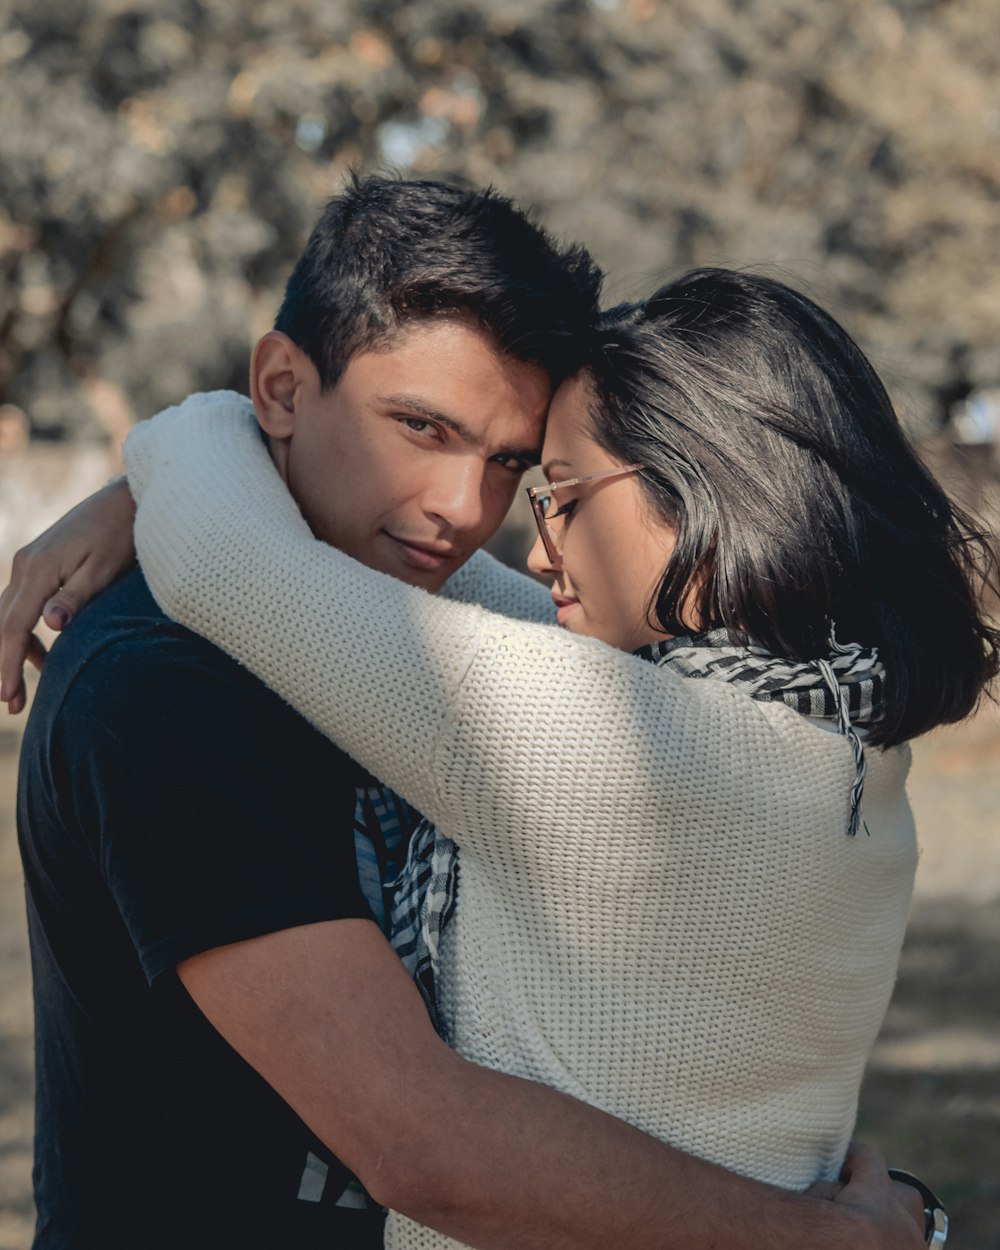 man in blue t-shirt hugging woman in white knit sweater